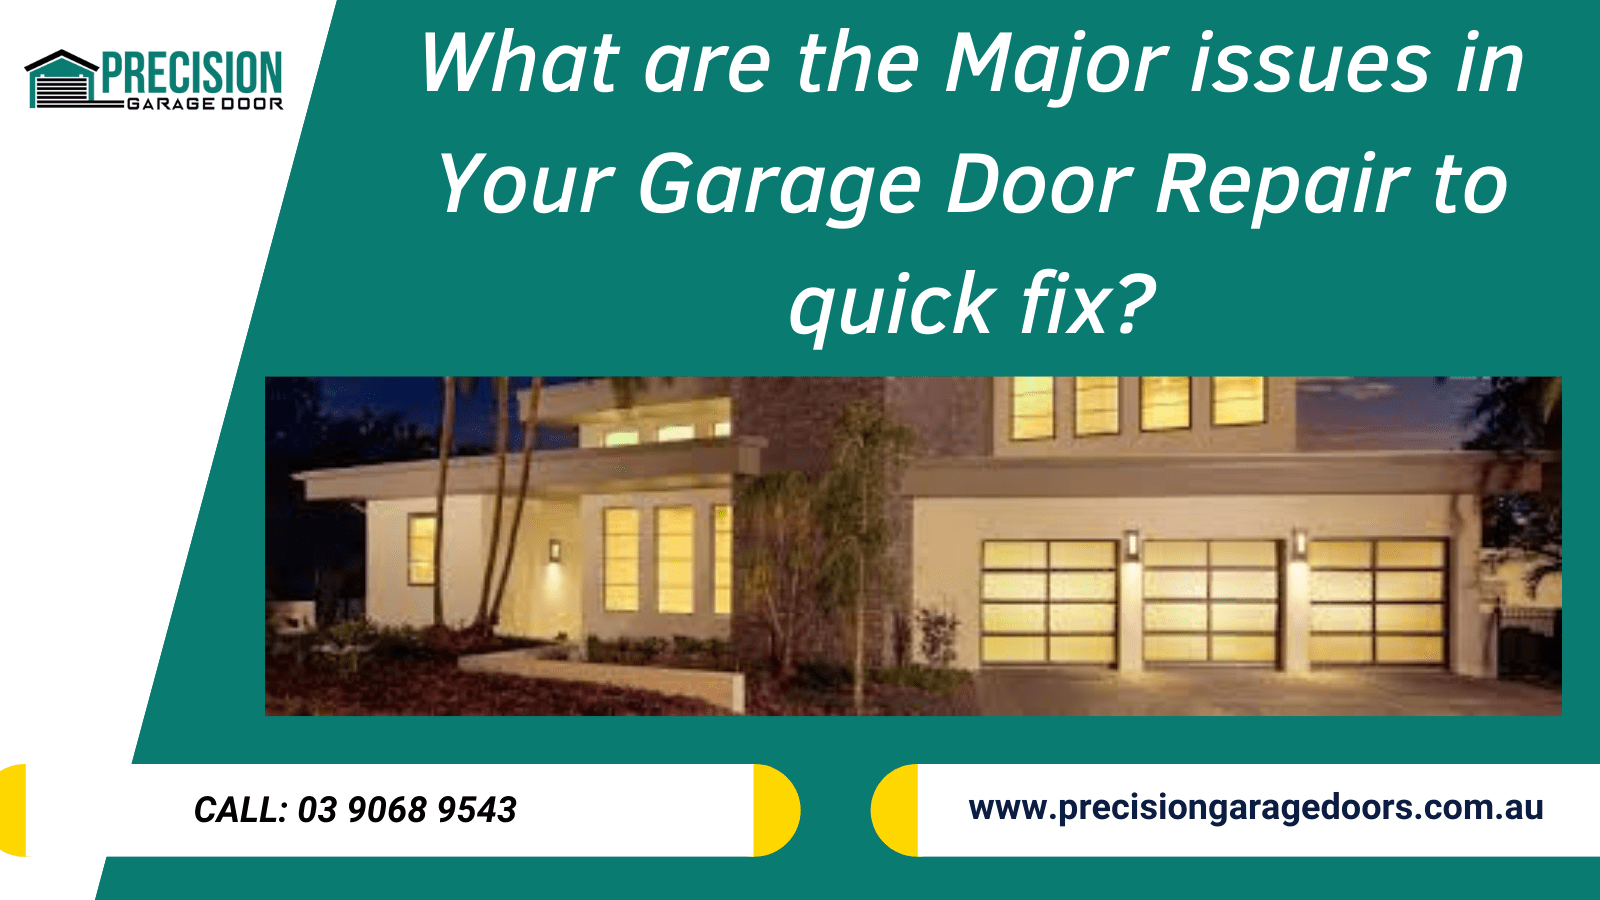 What are the Major issues in Your Garage Door Repair to quick fix